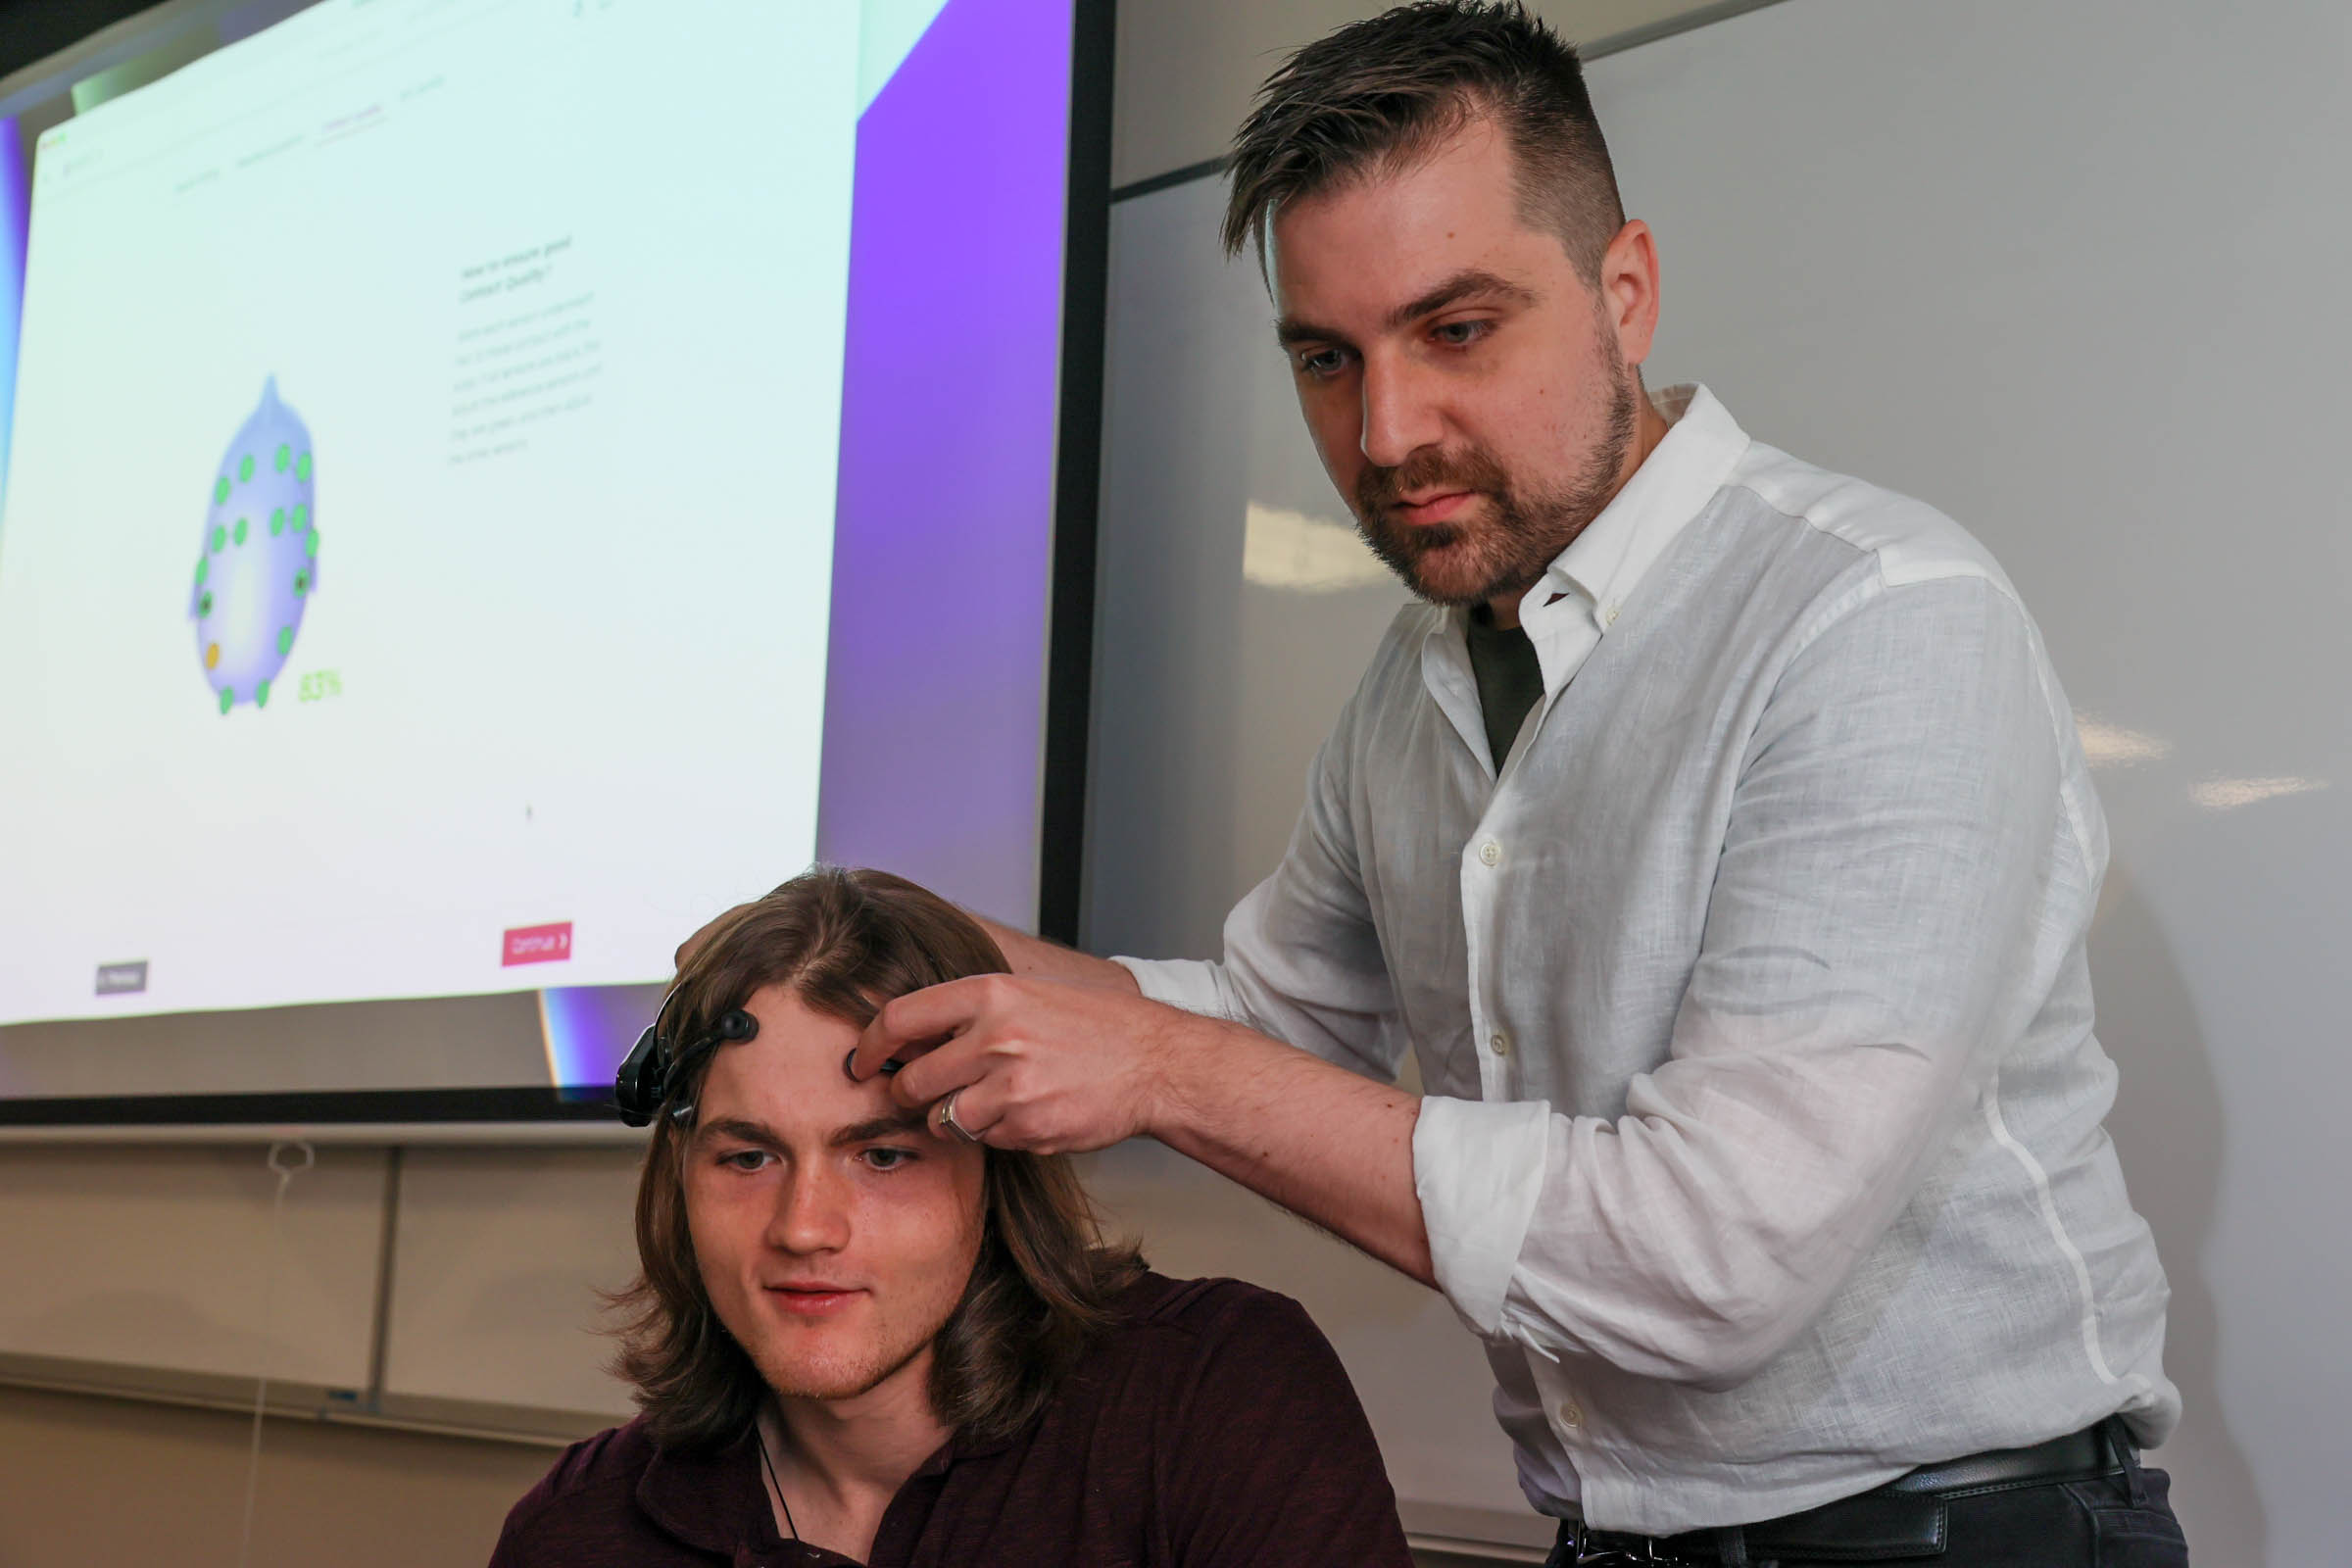 Warren de Wit setting up data collection for another student's neural patterns, which he then uses to train an AI in his research​.